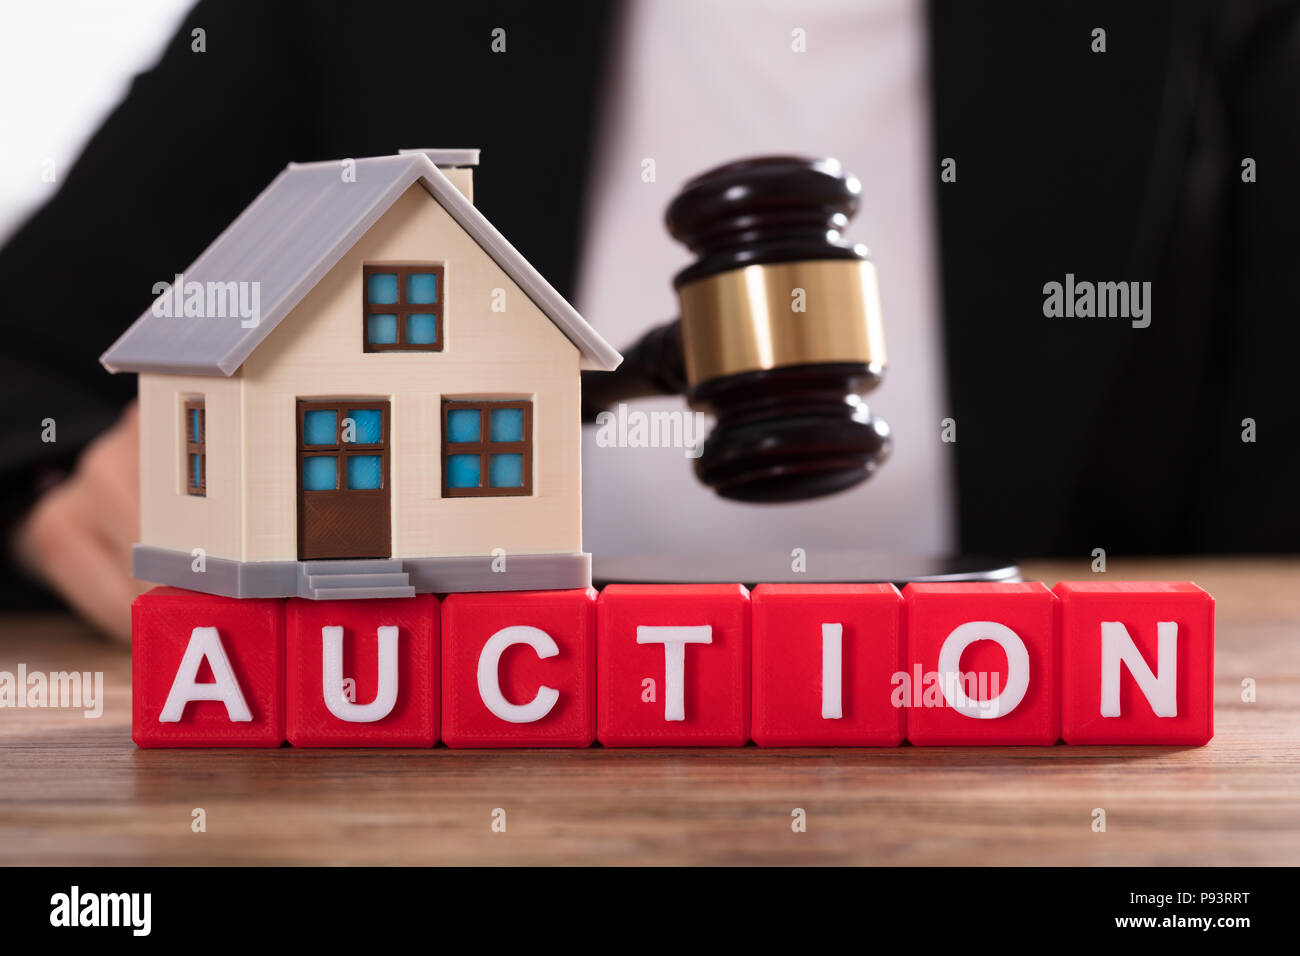 House Model Over Auction Cubic Blocks In Front Of Judge Striking Gavel Stock Photo